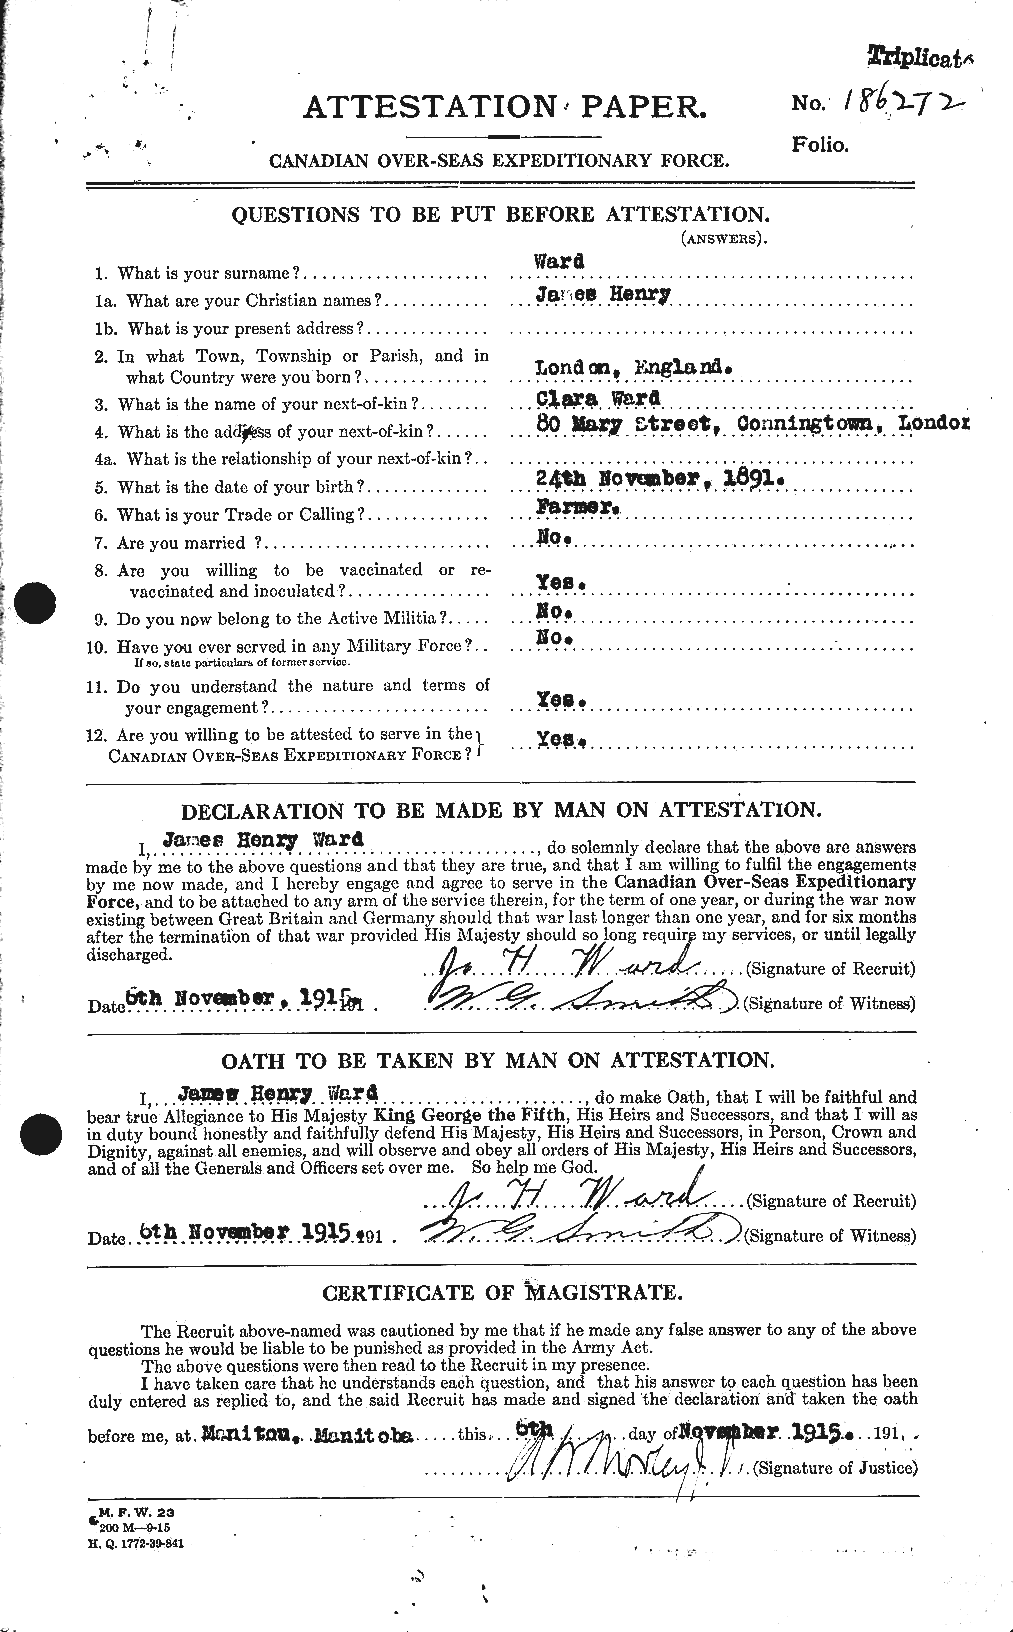 Personnel Records of the First World War - CEF 657910a